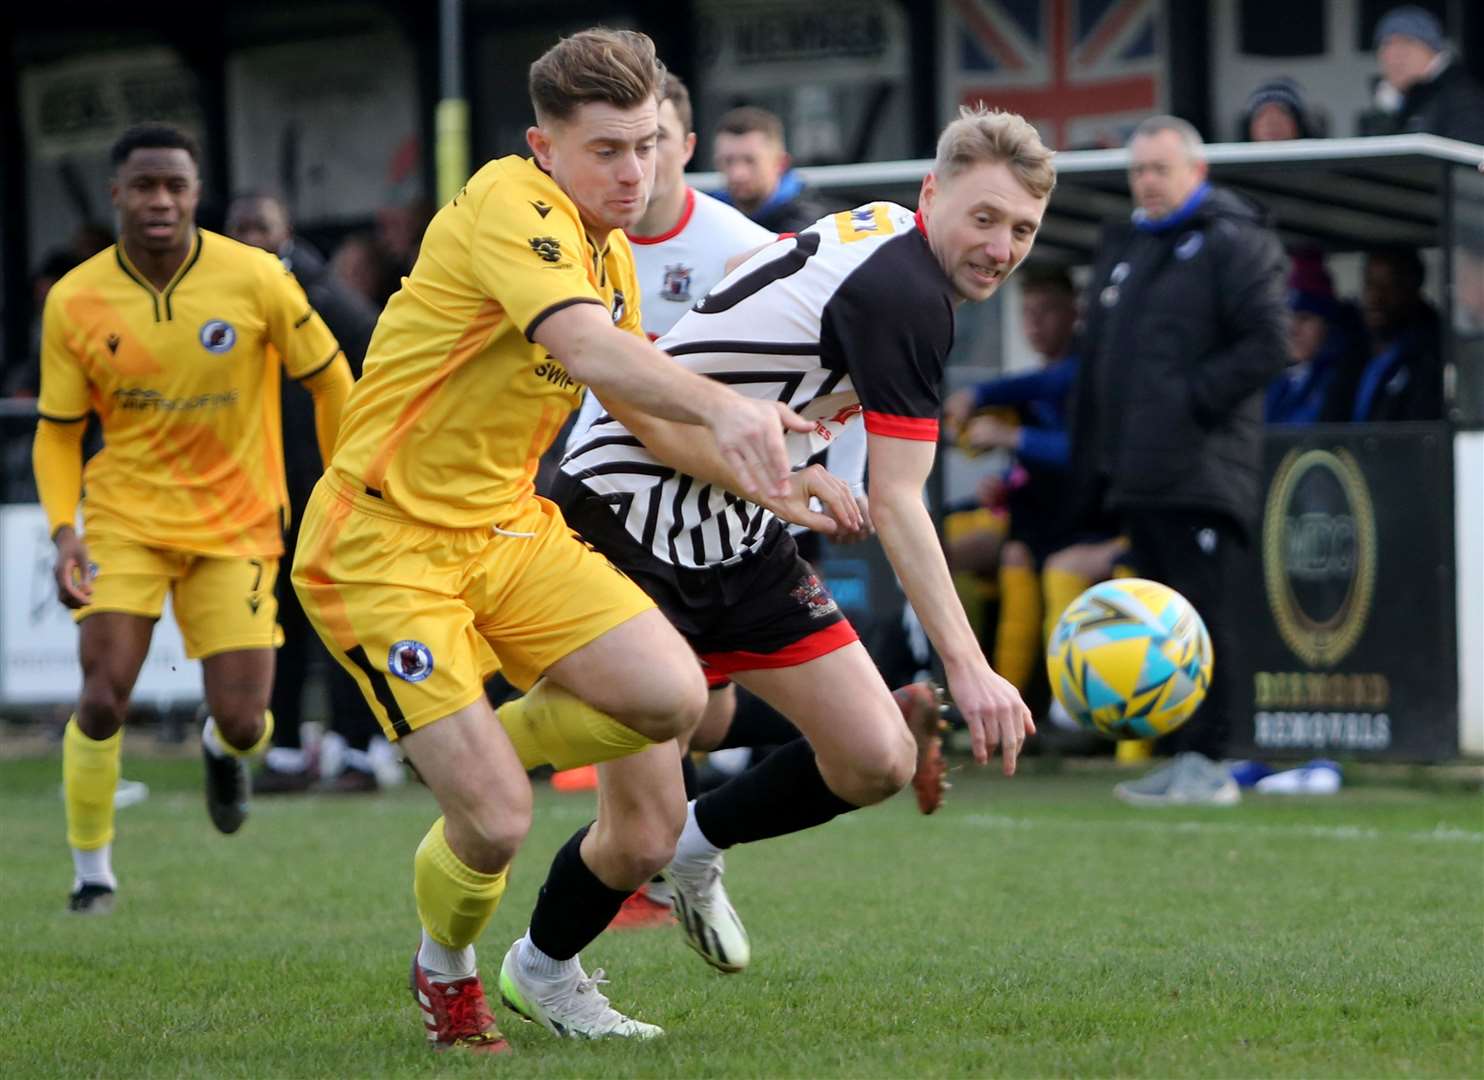 Deal's Ben Chapman in the thick of the action during last weekend’s Southern Counties East League 2-0 victory against Bearsted. Picture: Paul Willmott